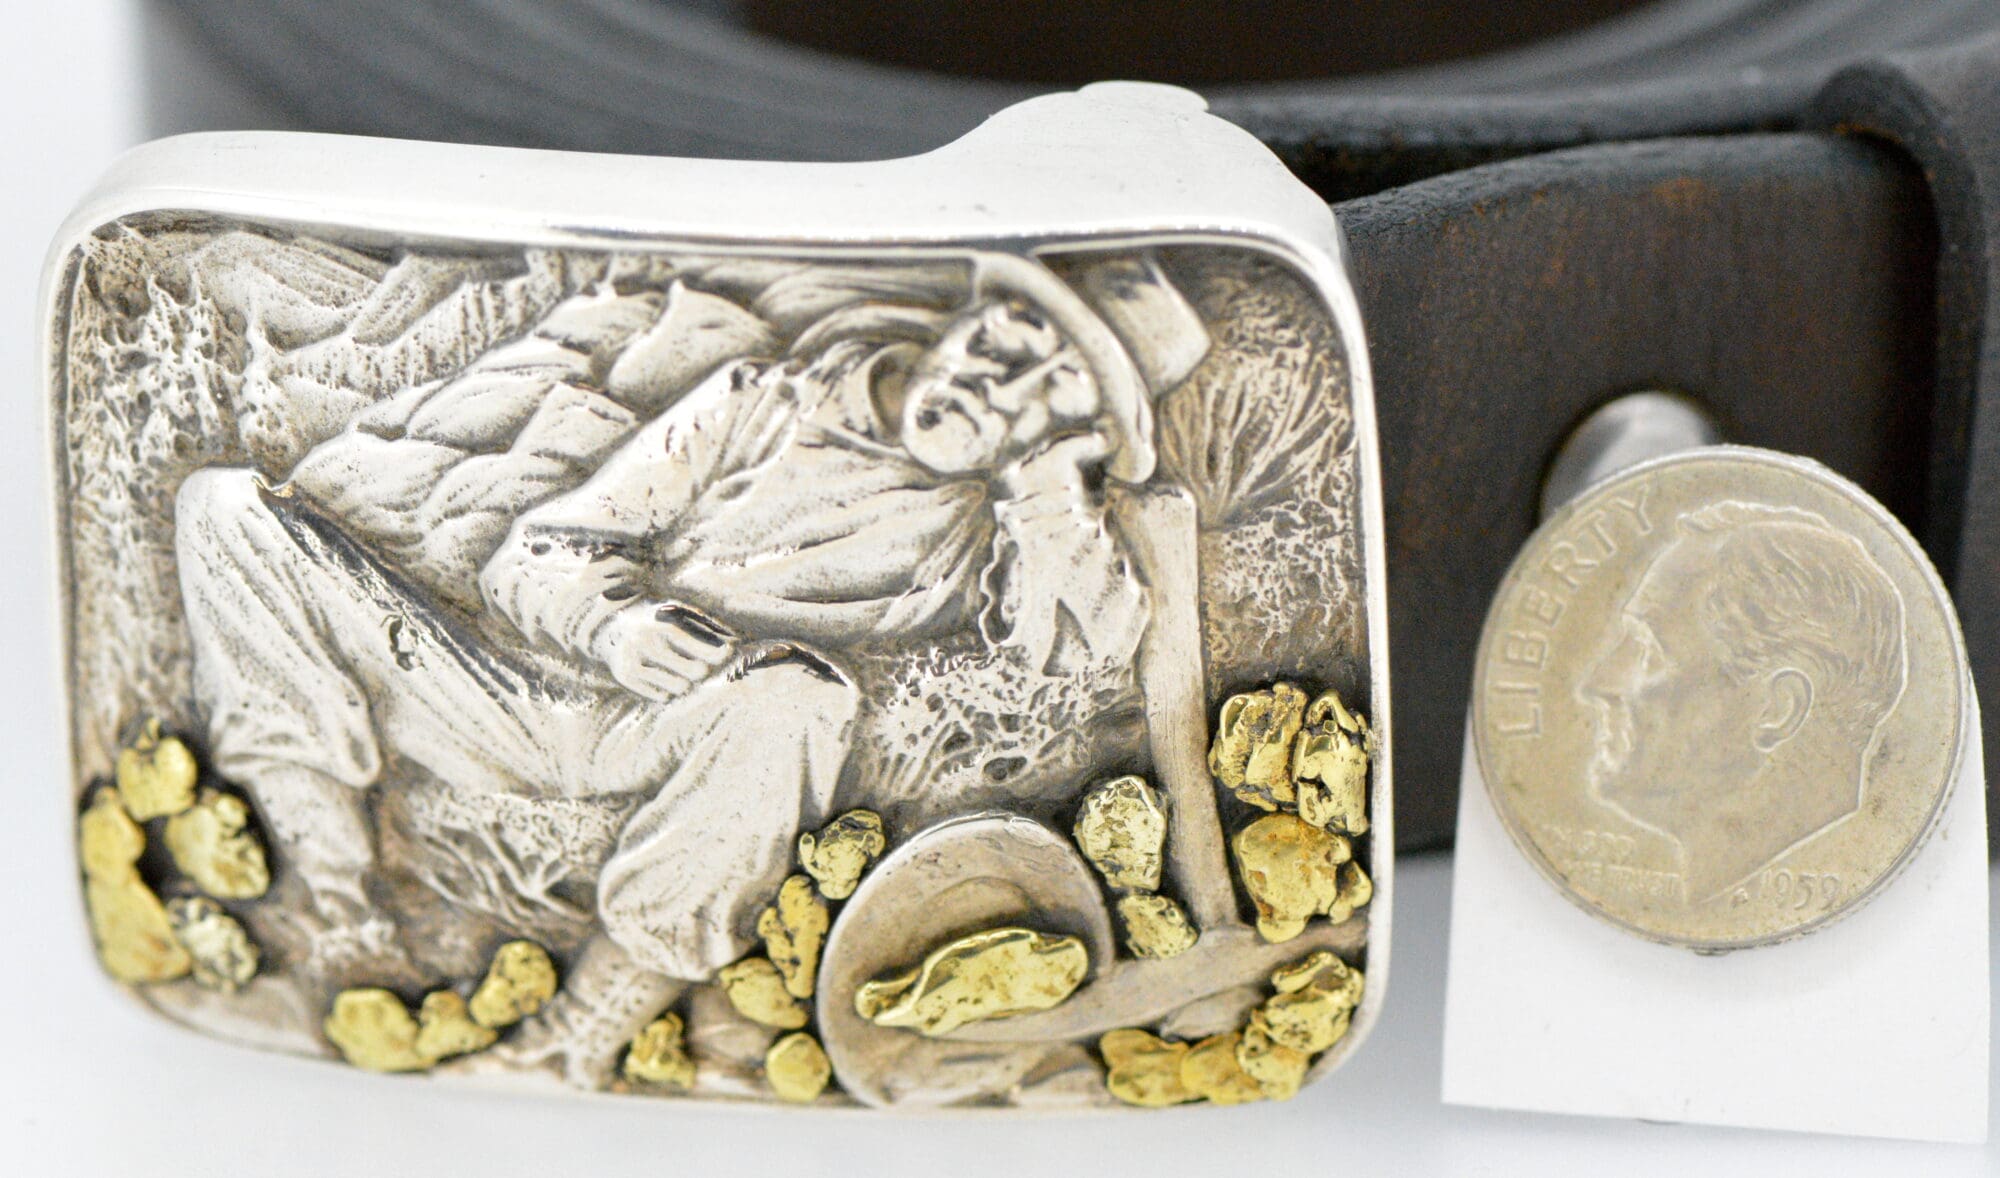 Belt buckle encrusted with gold nuggets and coins